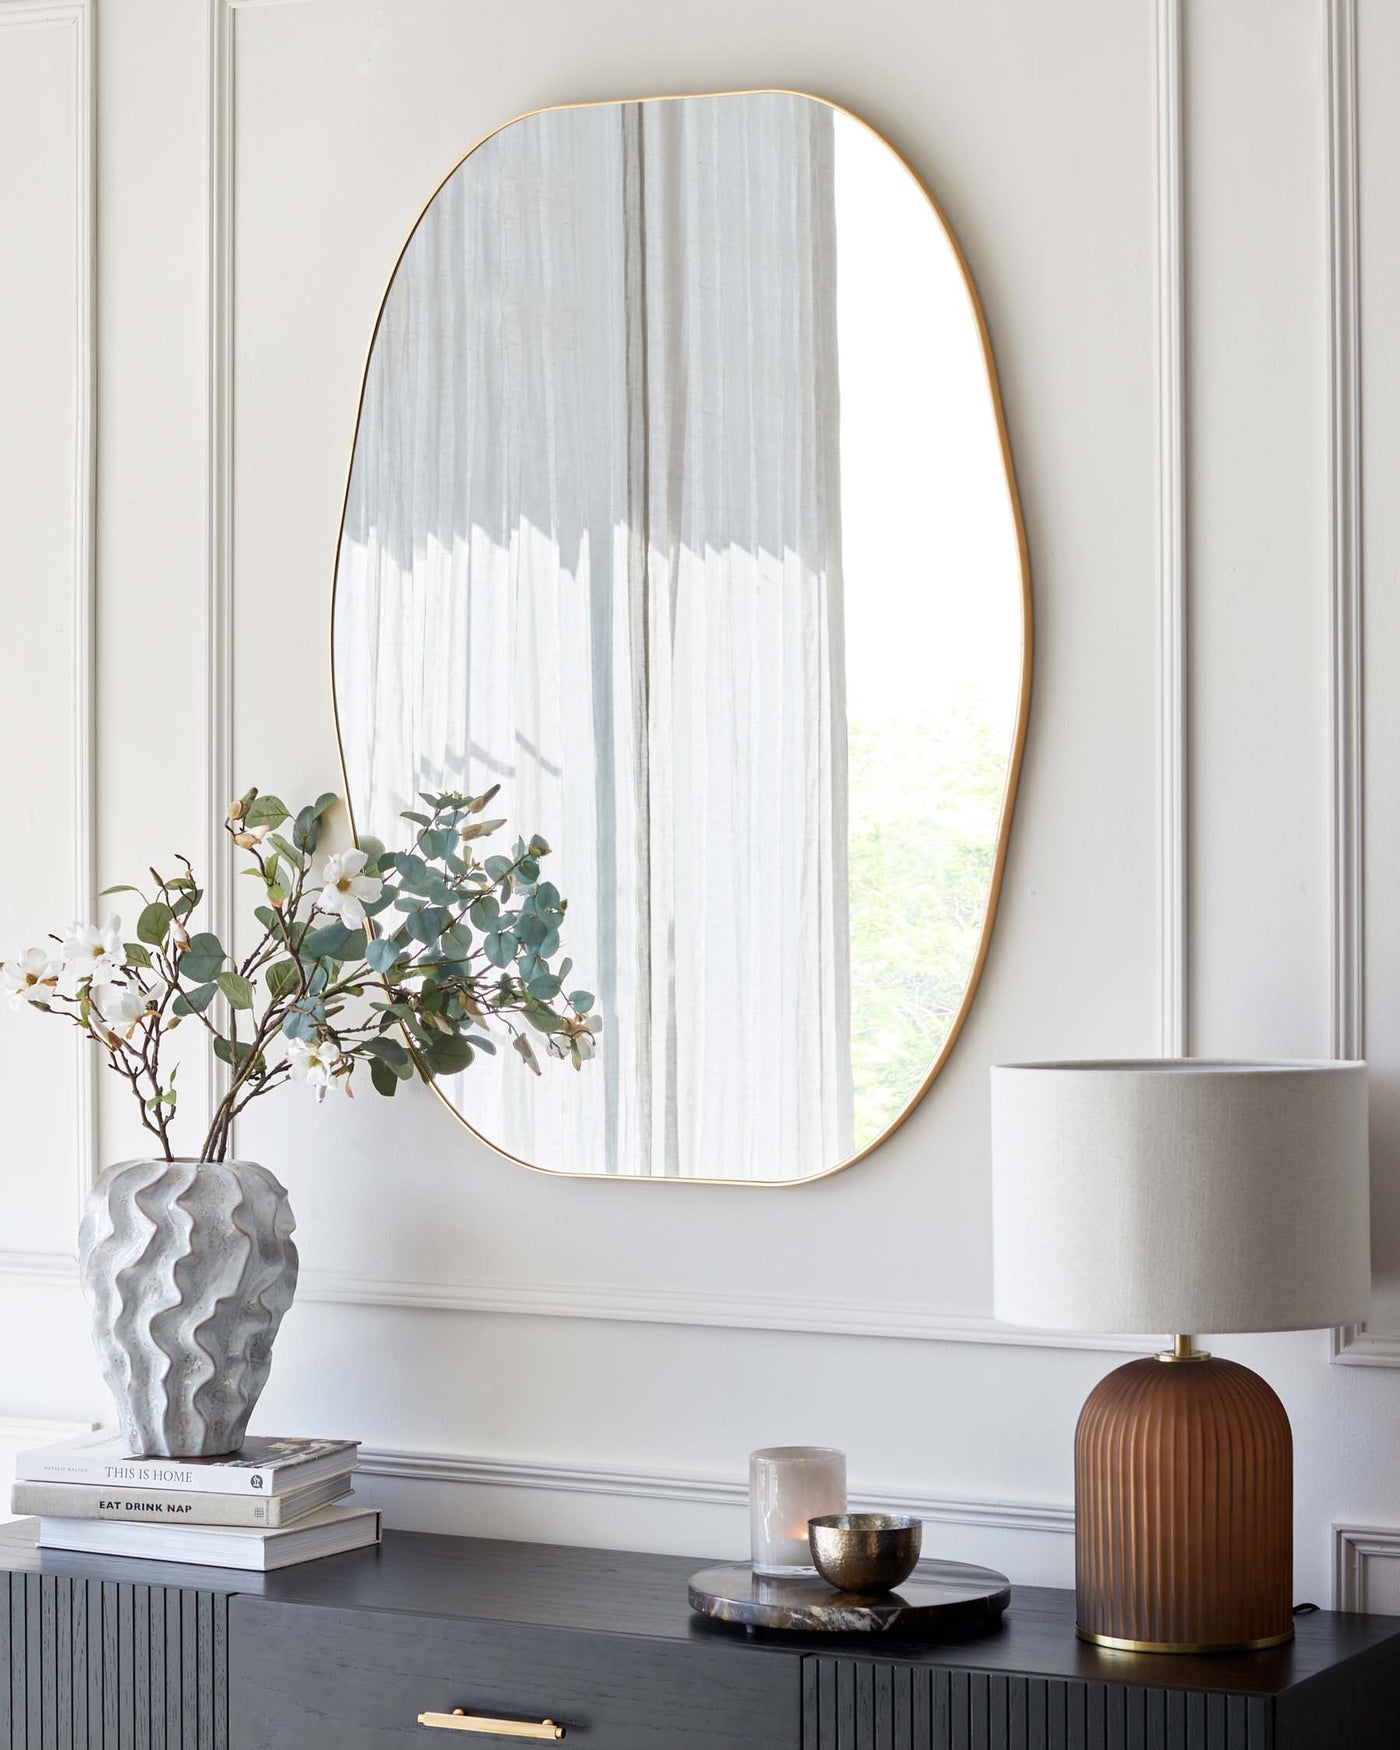 A sleek modern room featuring an elegant oval mirror with a thin gold frame mounted on a white wall with decorative mouldings. Below the mirror is a dark wood console table with ribbed frontal detailing and gold handles. The table is adorned with a tall, textured grey vase holding eucalyptus branches, a stack of hardcover books, a cylindrical white lamp with a brown base, and a small round dish with a candle. A round black side stool with a glossy finish sits adjacent to the console table.